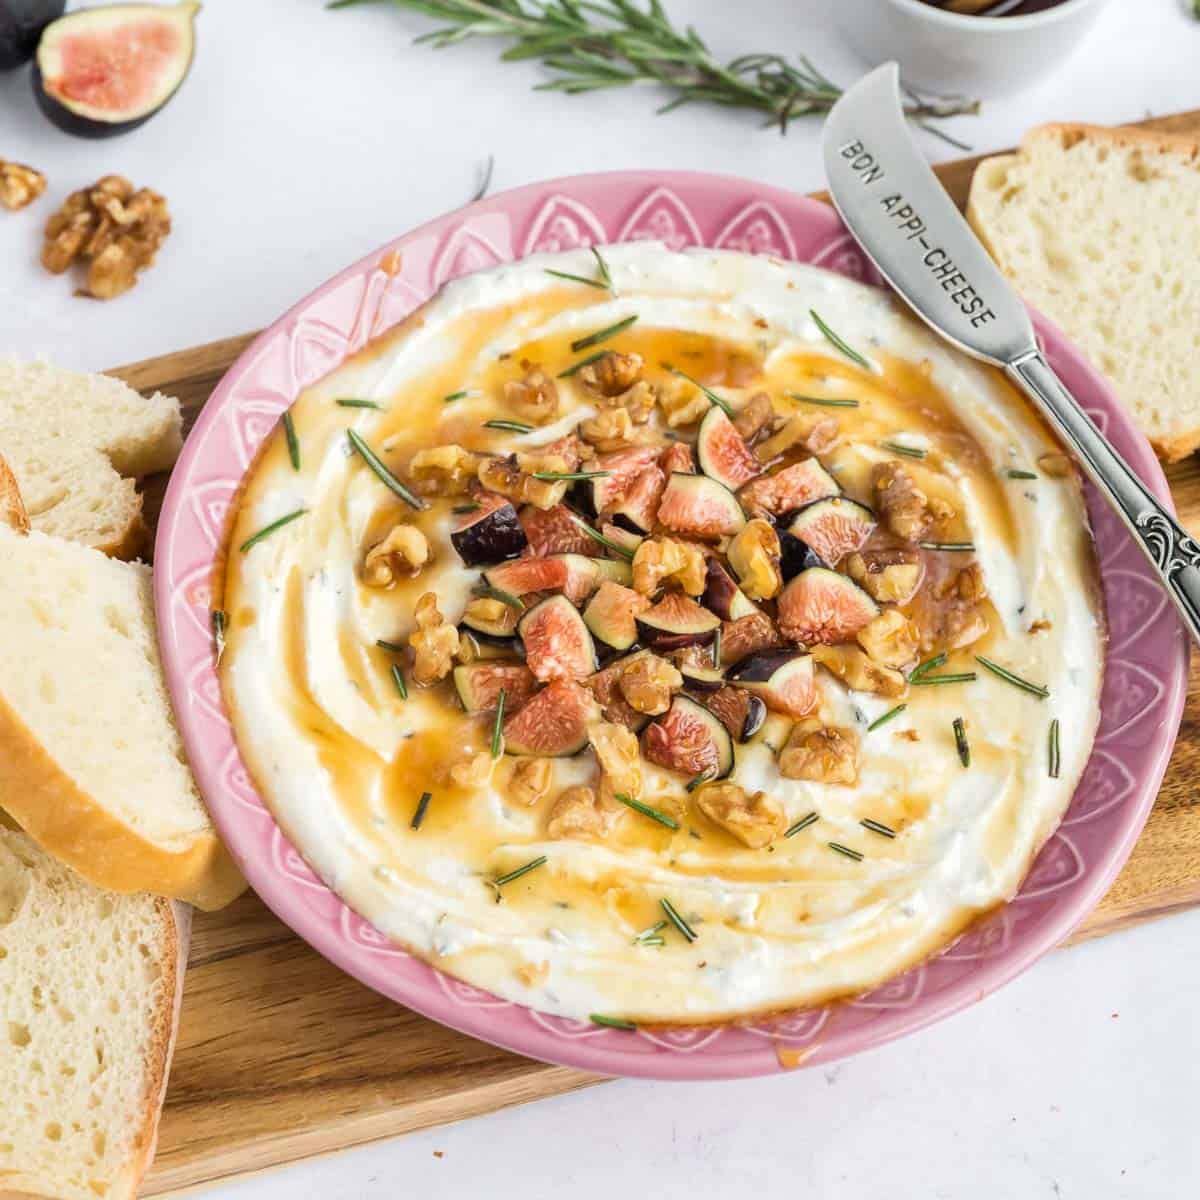 Whipped Feta Dip with Figs, Nuts, and Honey